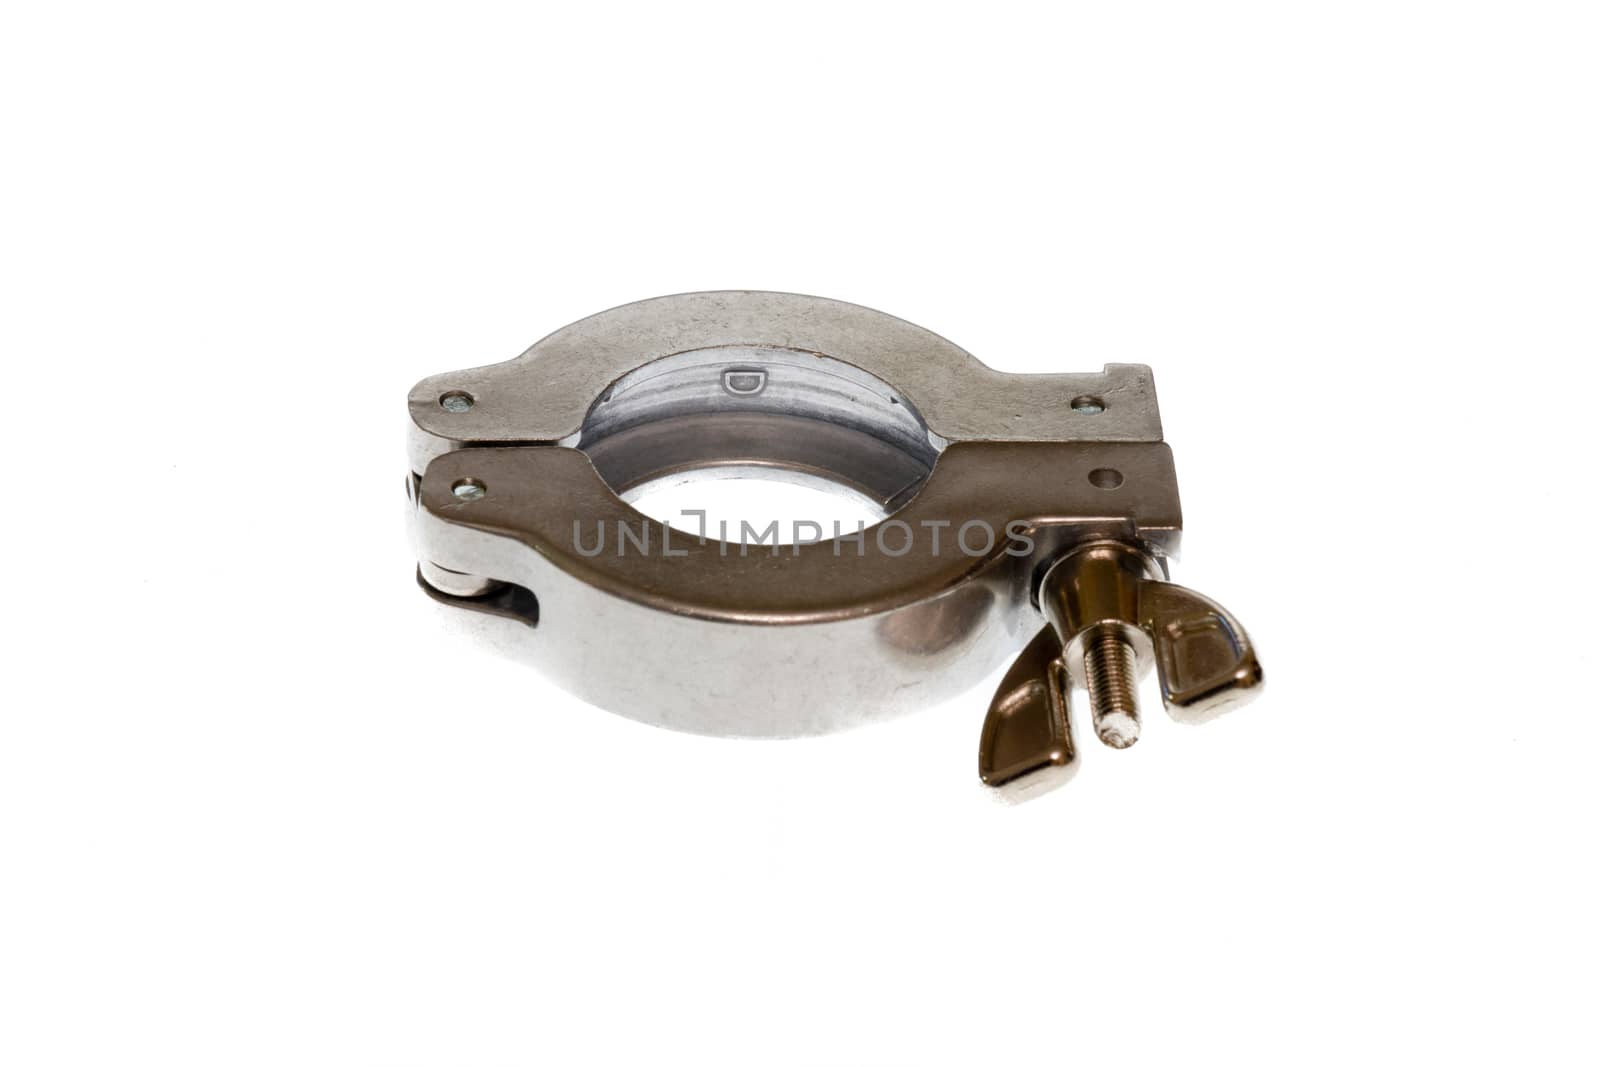 Metal collar with hand screw for pipe